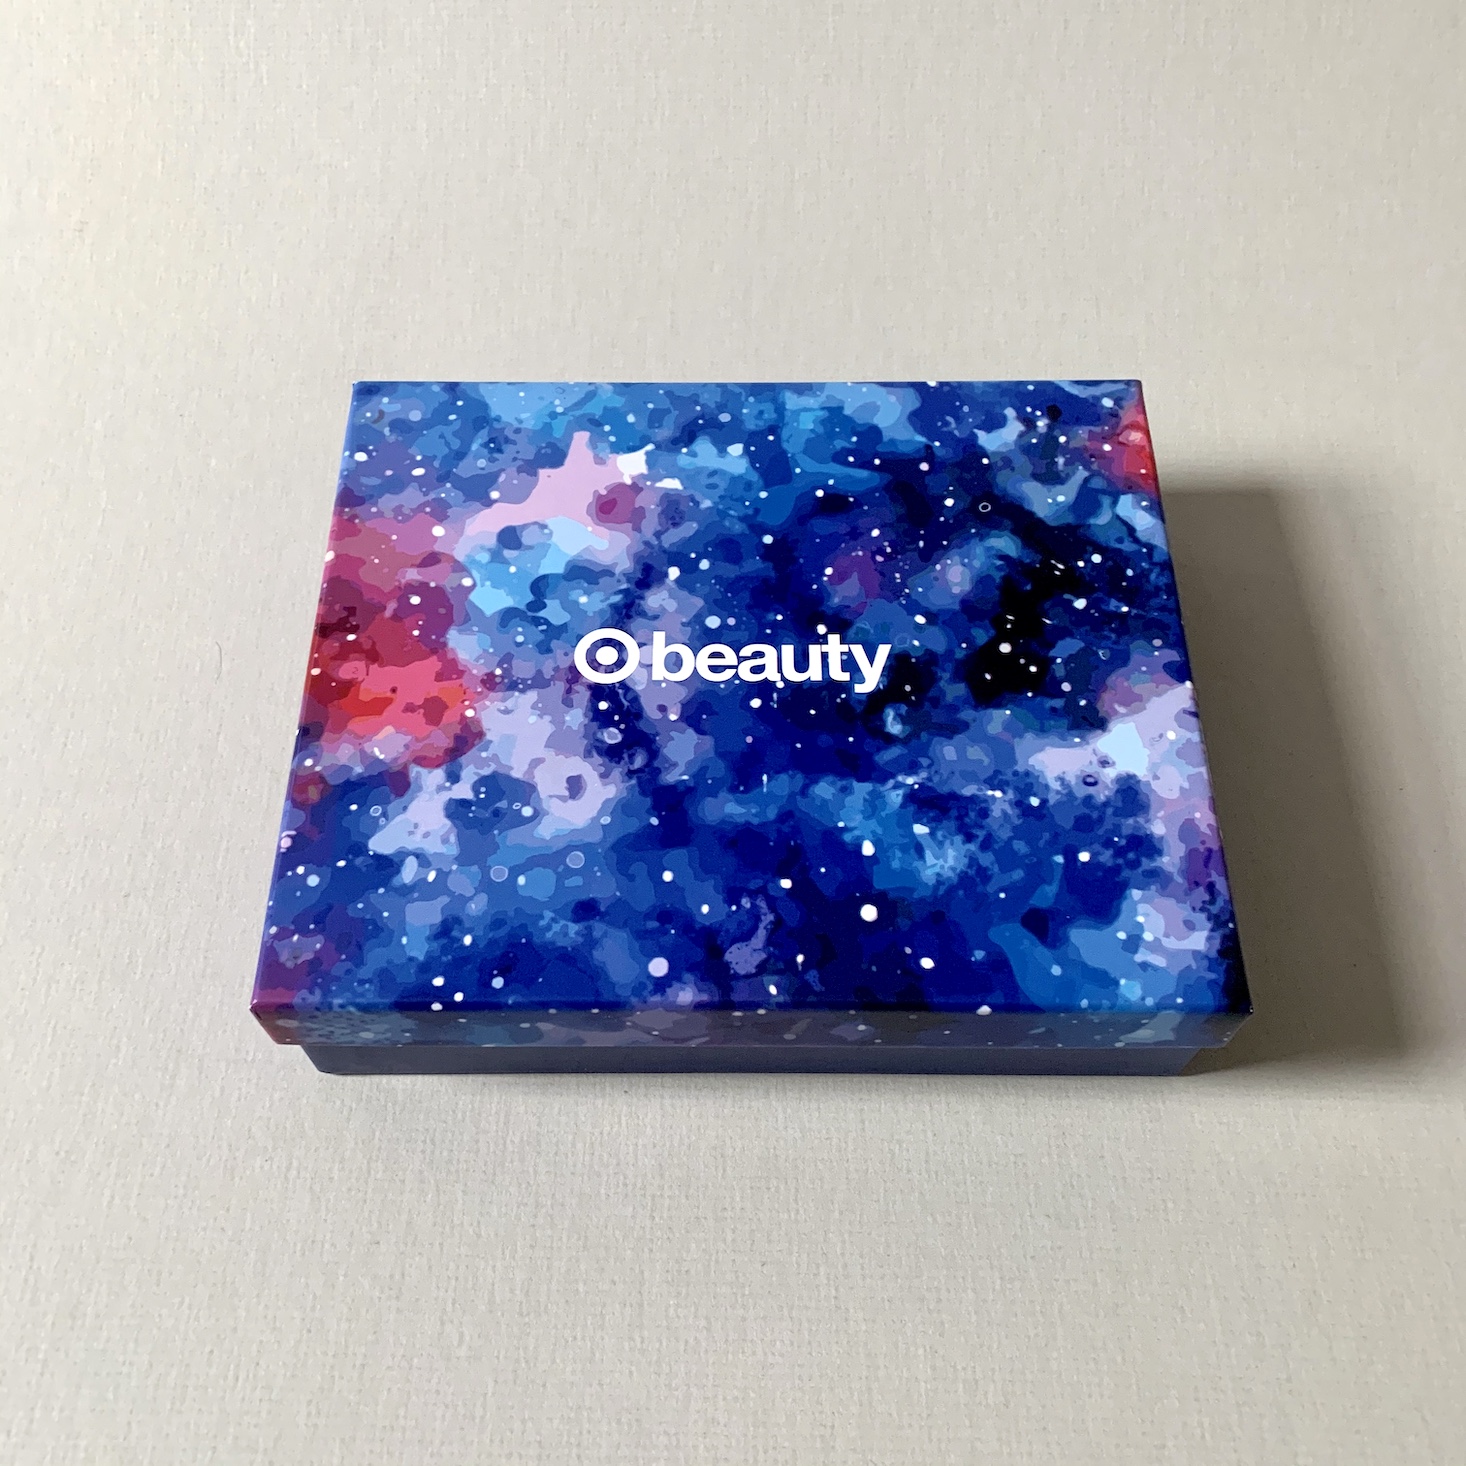 Target Beauty Box Review – January 2020